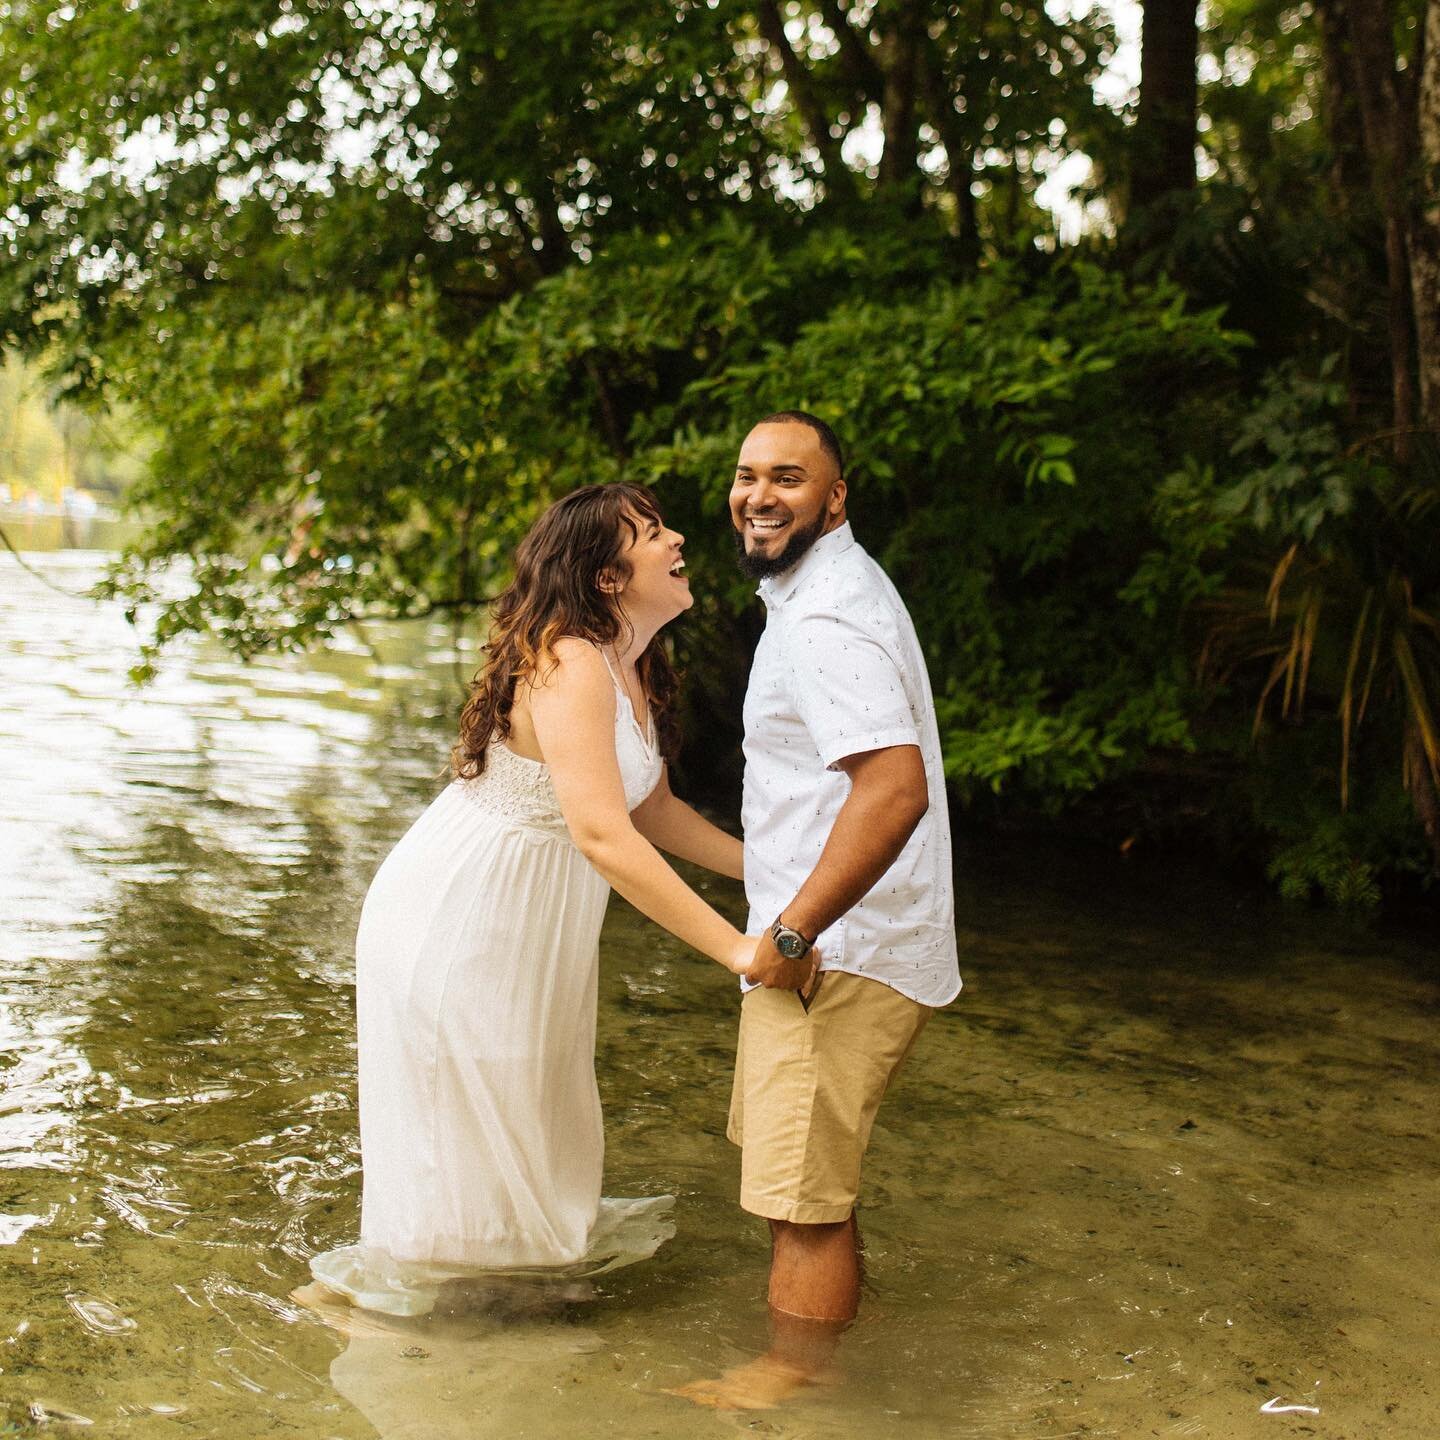 10/10 recommend doing your engagement photos at Wekiwa Springs! 🤍 

#orlandocouplesphotographer #orlandocouplesphotography #centralfloridaphotographer #floridacouplesphotographer #orlandoengagementphotographer #orlandoengagementsession #orlandoweddi